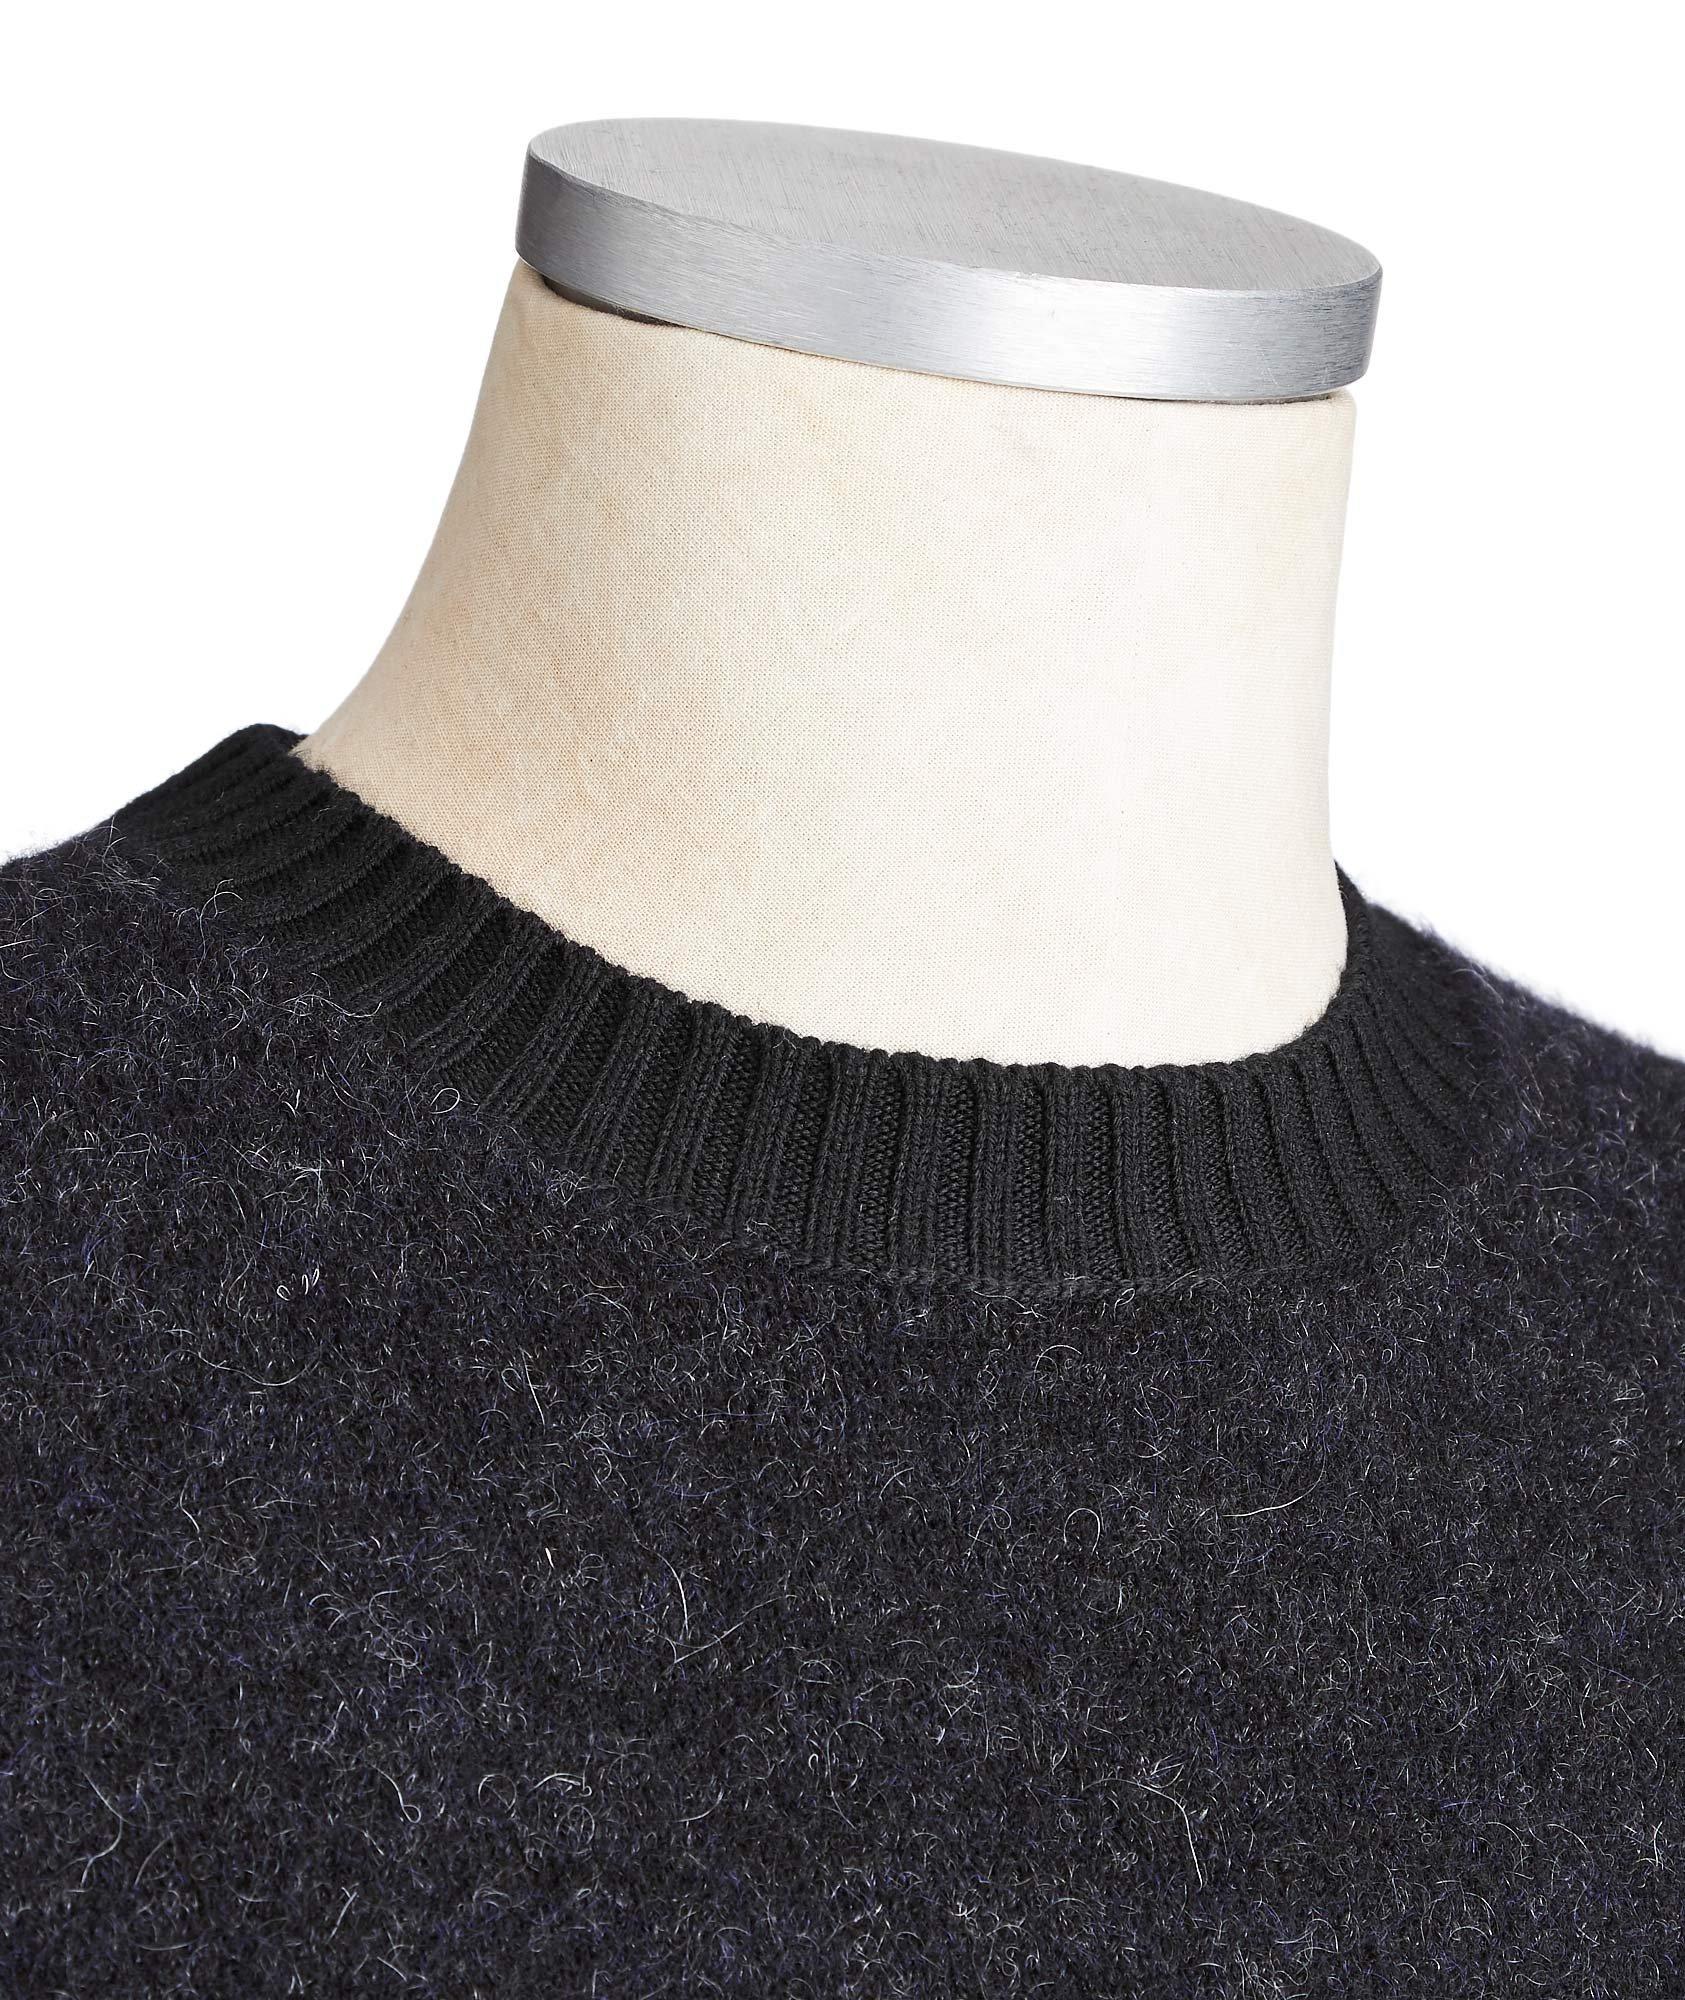 Textured Wool-Blend Sweater image 1